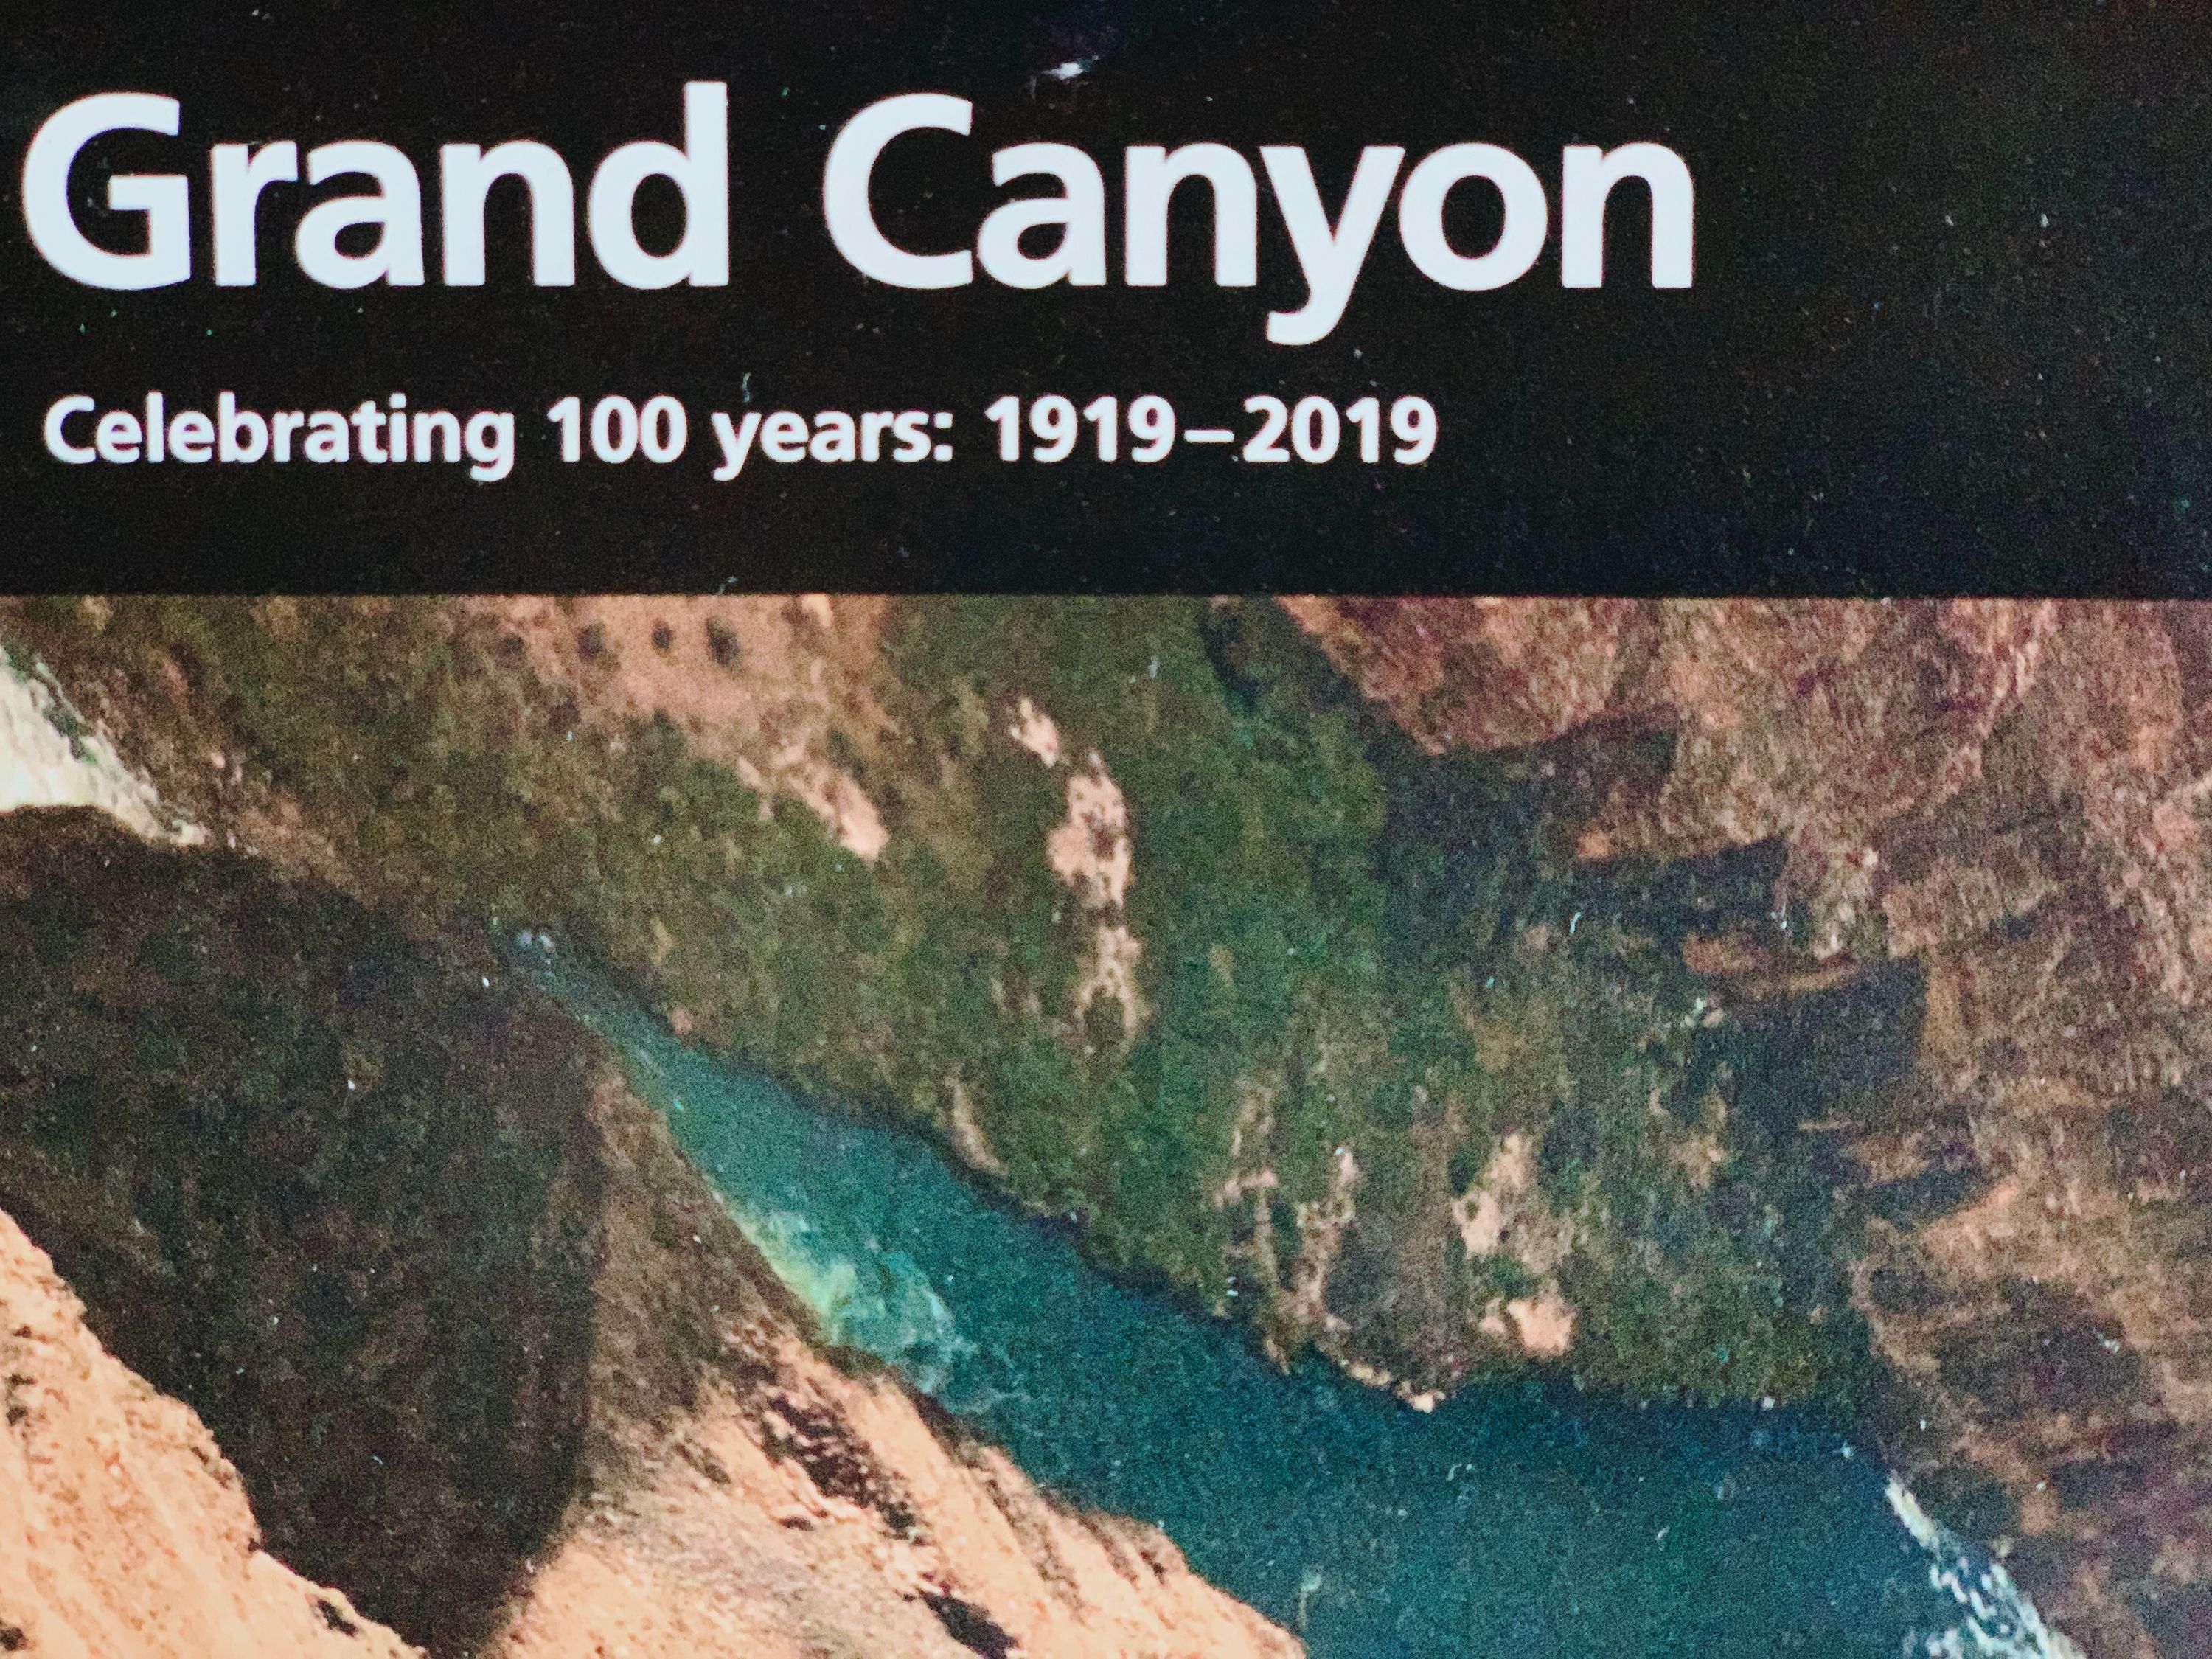 The Grand Canyon is celebrating 100 years in 2019